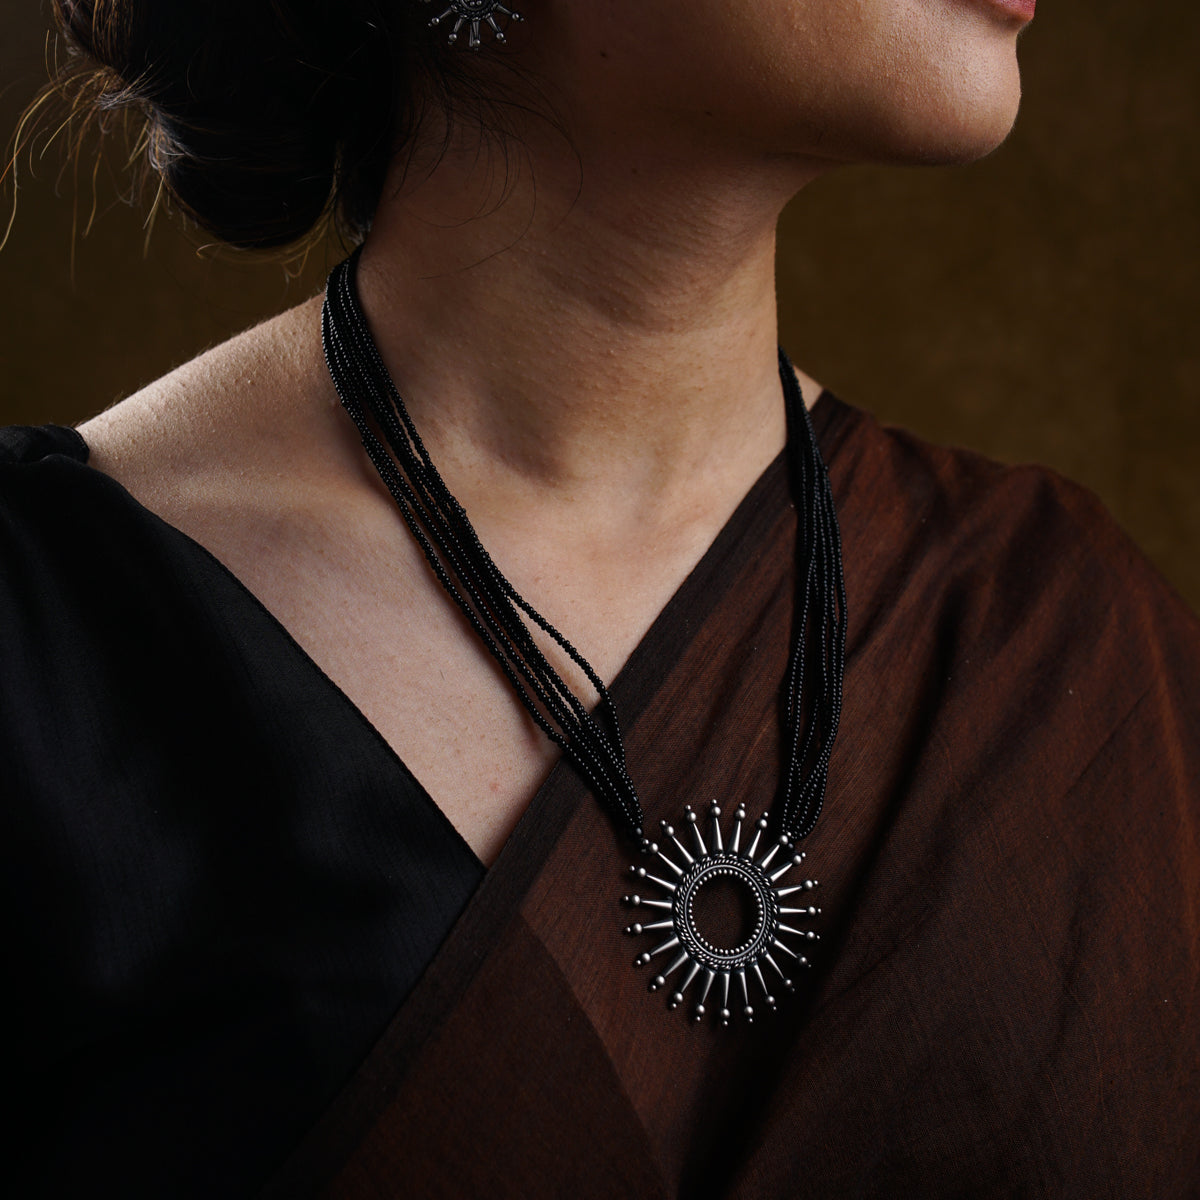 a woman wearing a black necklace and a brown shirt